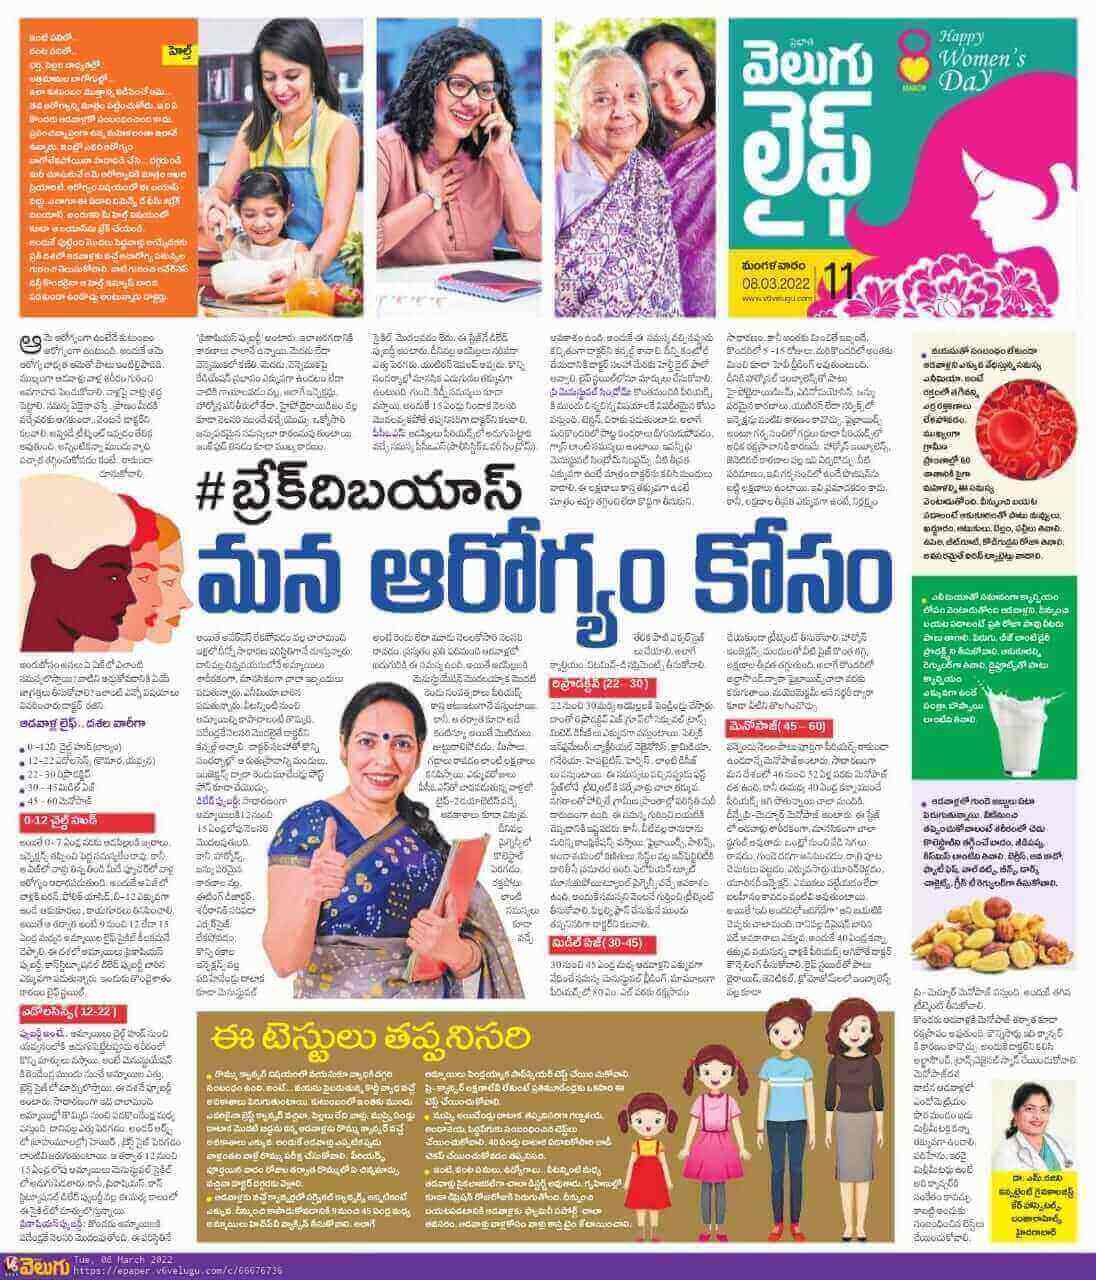 Article on Women Health on the occasion of International Women's Day by Dr. Muthineni Rajini - Senior Consultant Obstetrician and Gynecologist, Laparoscopic Surgeon, and Infertility Specialis